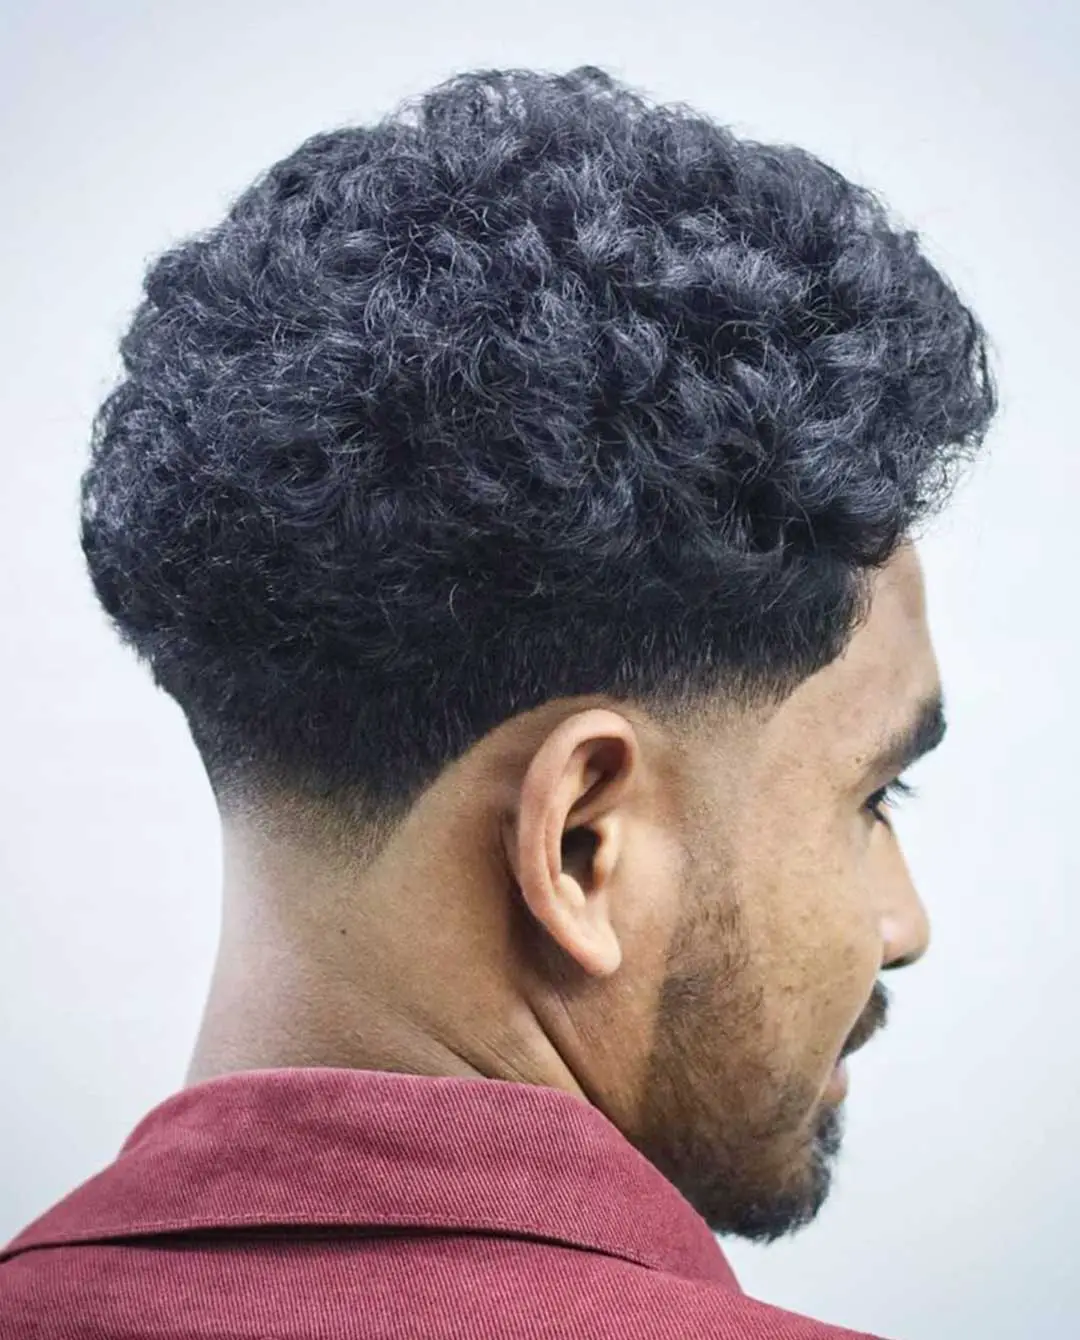 Low Taper Fade Curly Hair For Men - Fashionisk